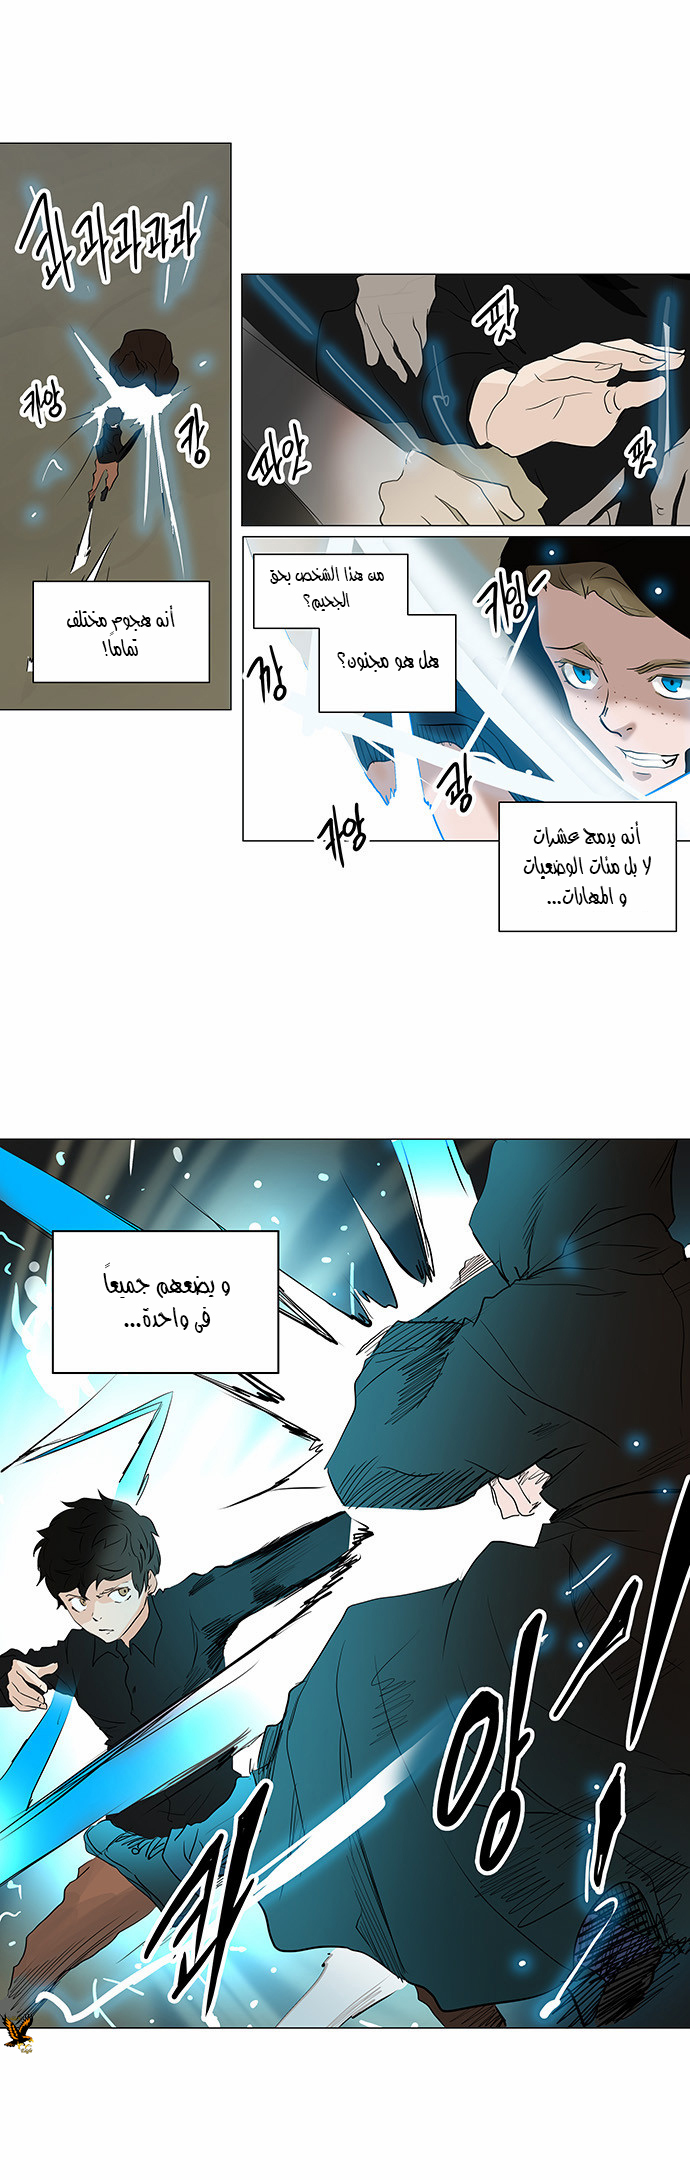 Tower of God 2: Chapter 137 - Page 1